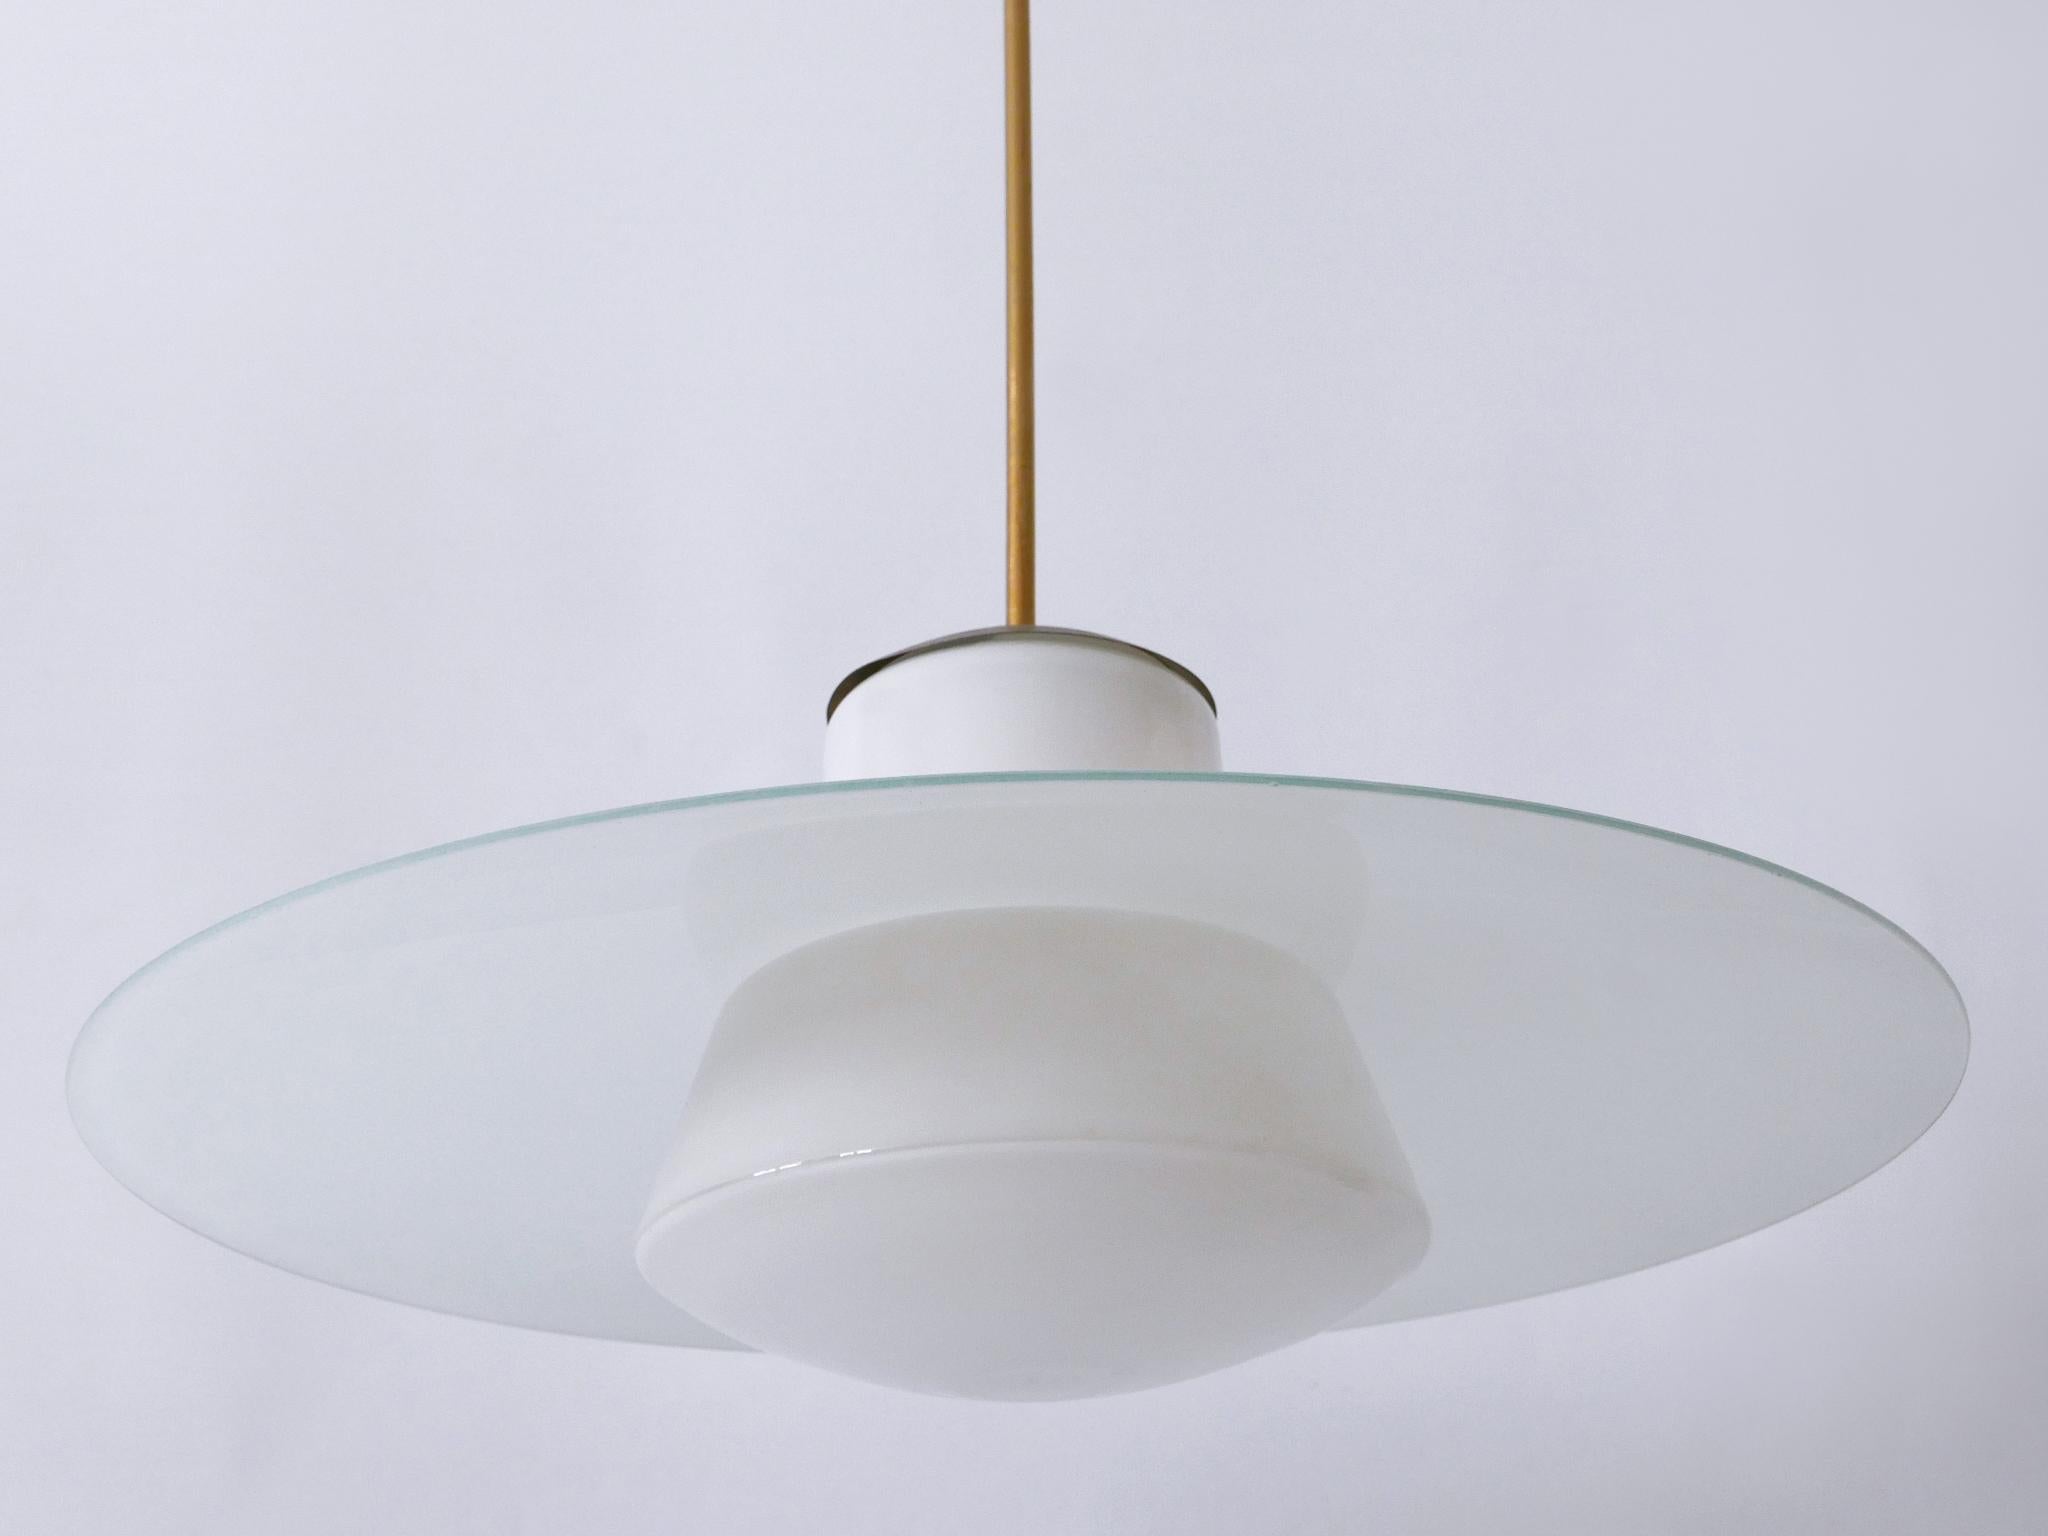 Mid-20th Century Rare Mid-Century Modern Pendant Lamp by Wolfgang Tümpel for Doria Germany 1950s For Sale